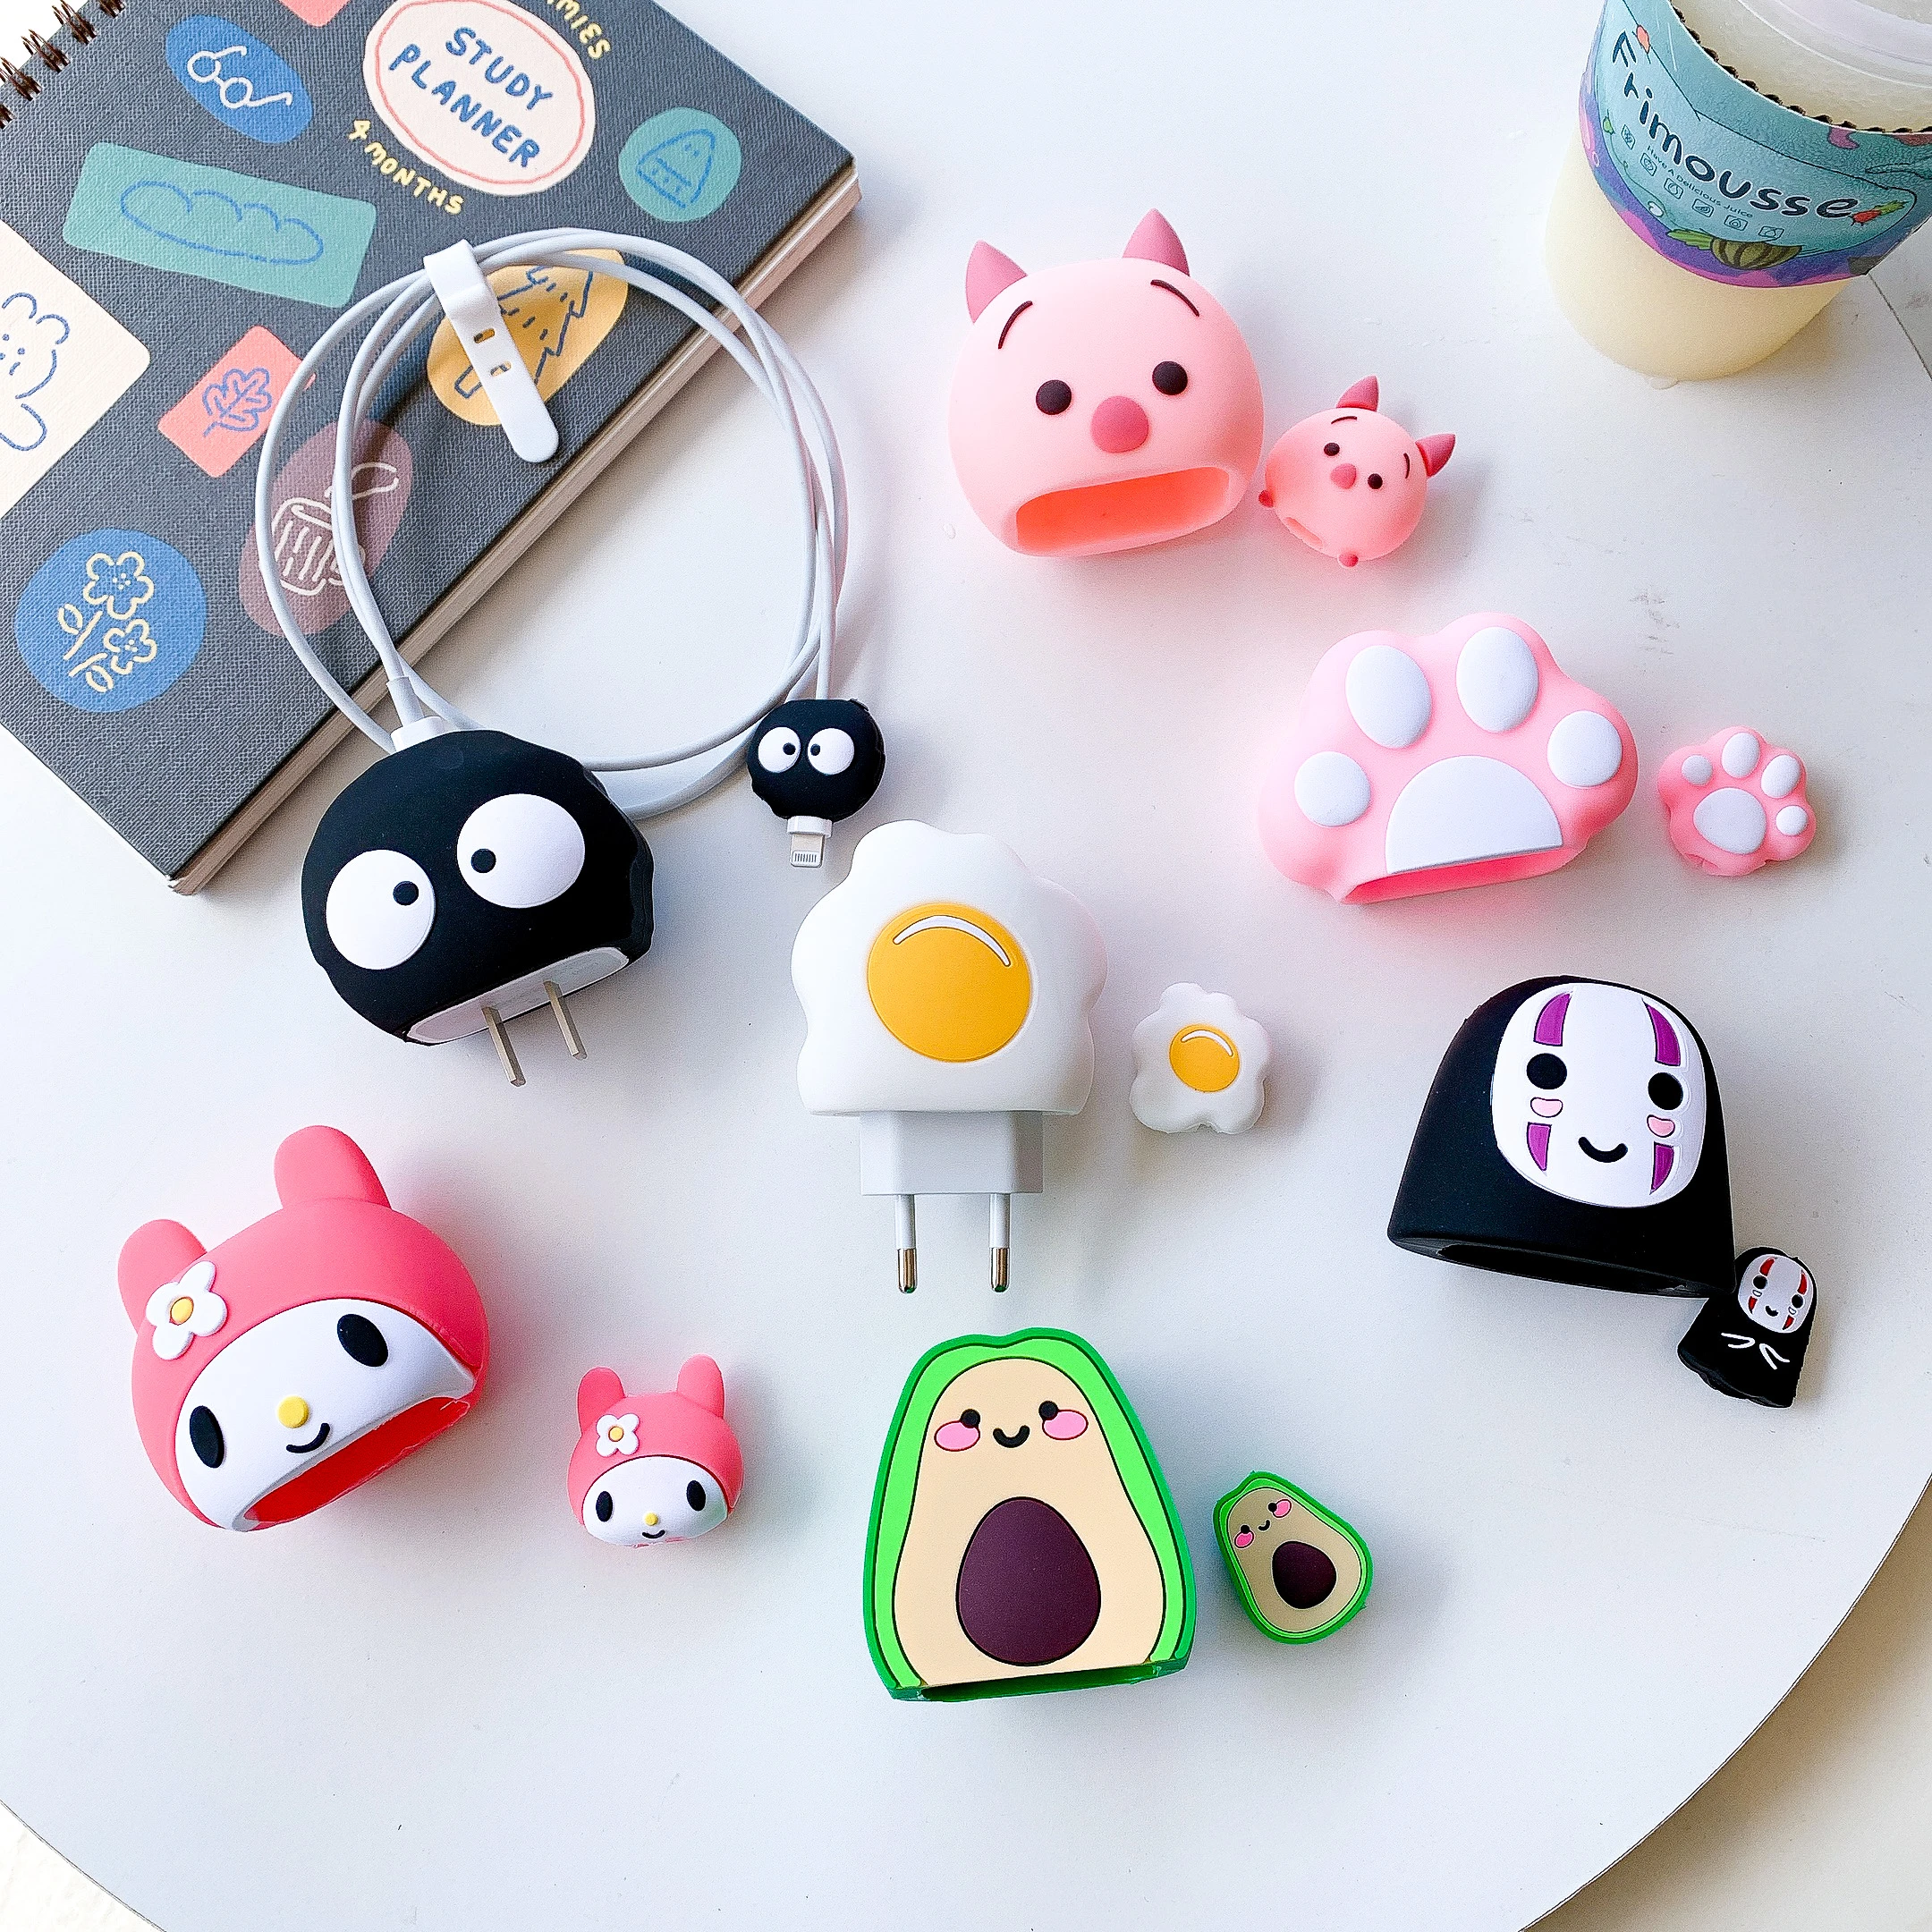 4k hdmi cable Cute Cartoon Silicone Charging Cable Winder Protective Case Angle Cable Protector Cover for Iphone Charger Plug Data Bites Line digital optical cable